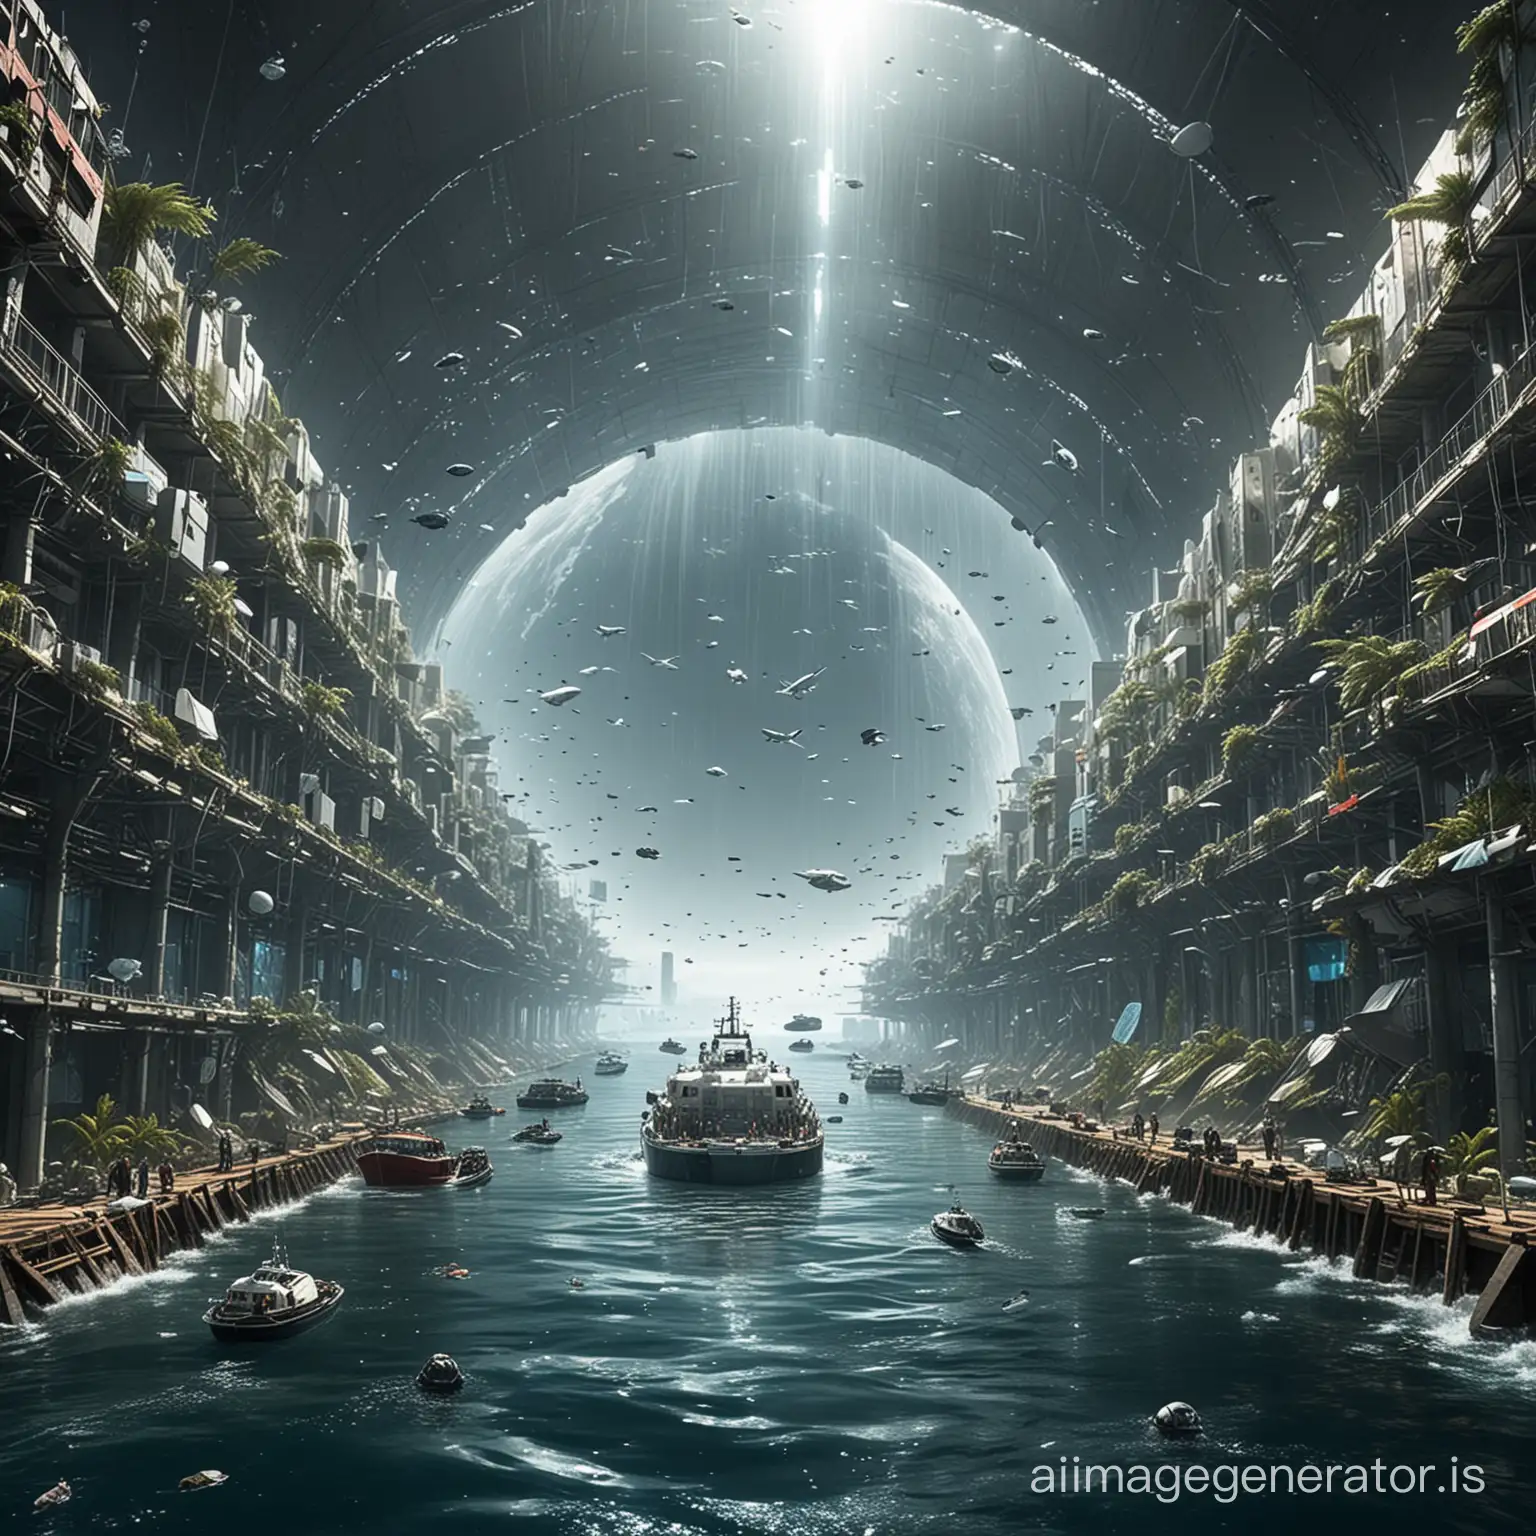 EcoFriendly-Underwater-Cityscape-with-Spaceship-Architecture-and-Glass-Tunnels